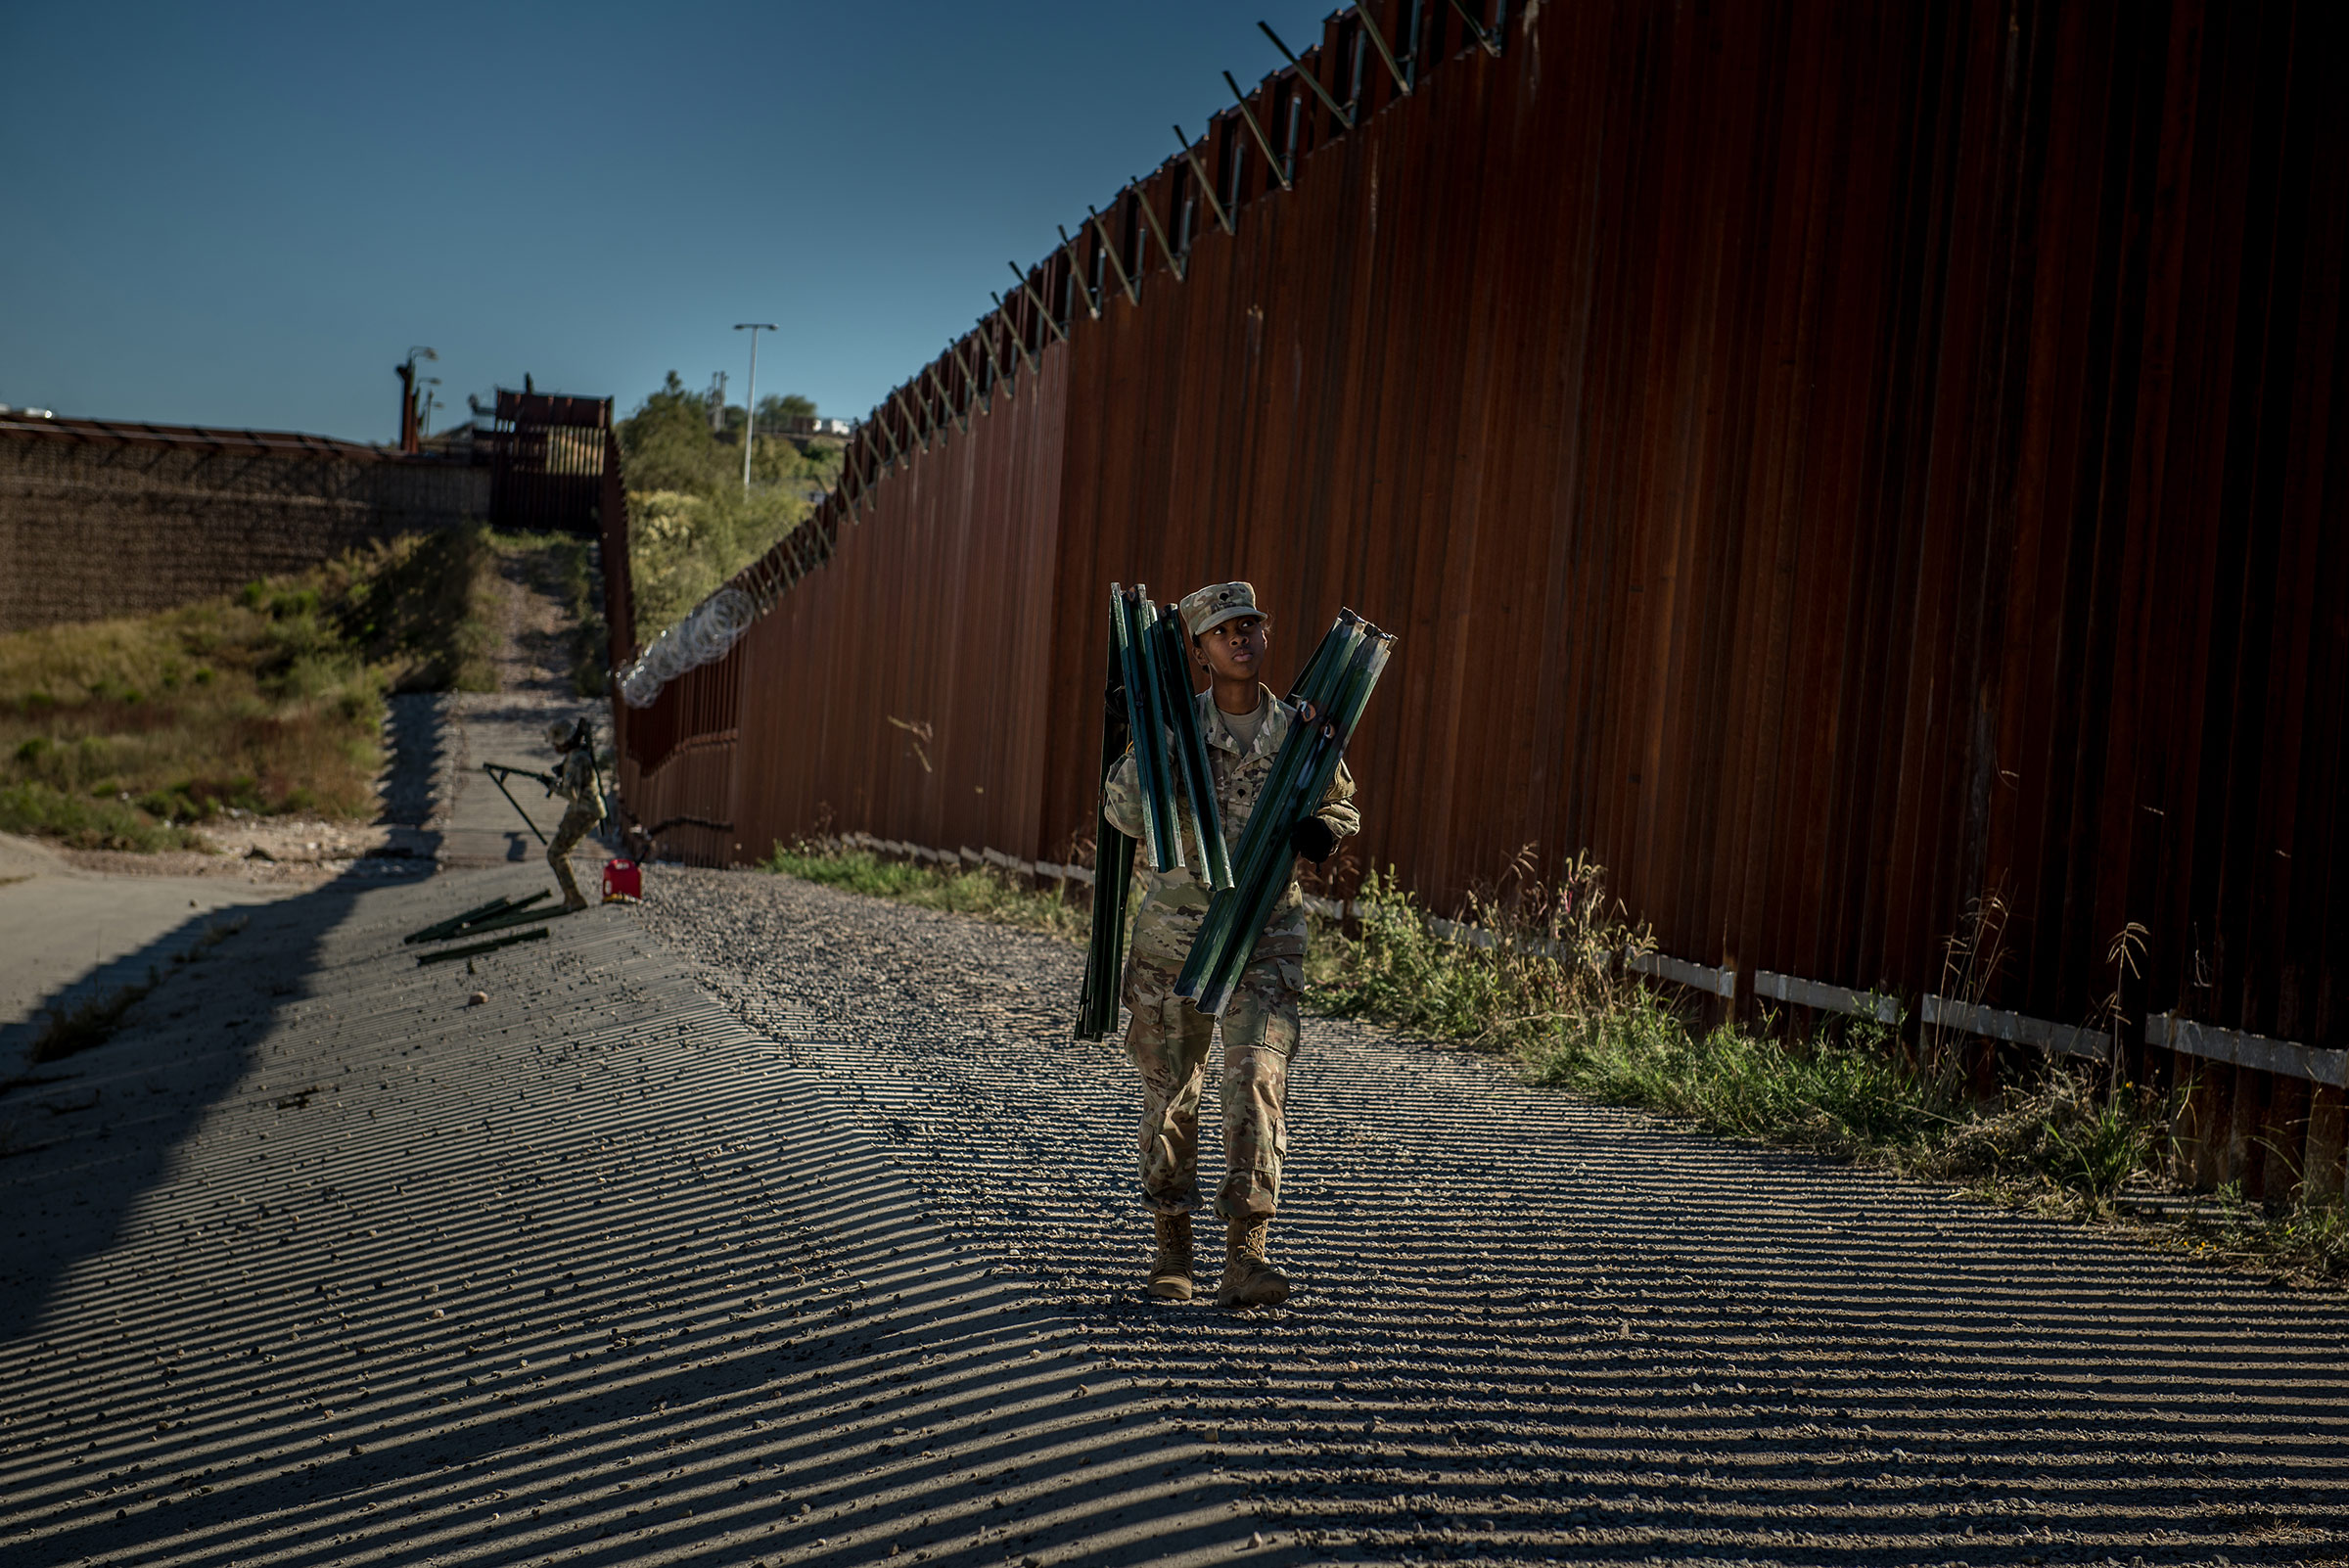 Soldiers install brackets and wire along the border wall in November. (Meridith Kohut for TIME)